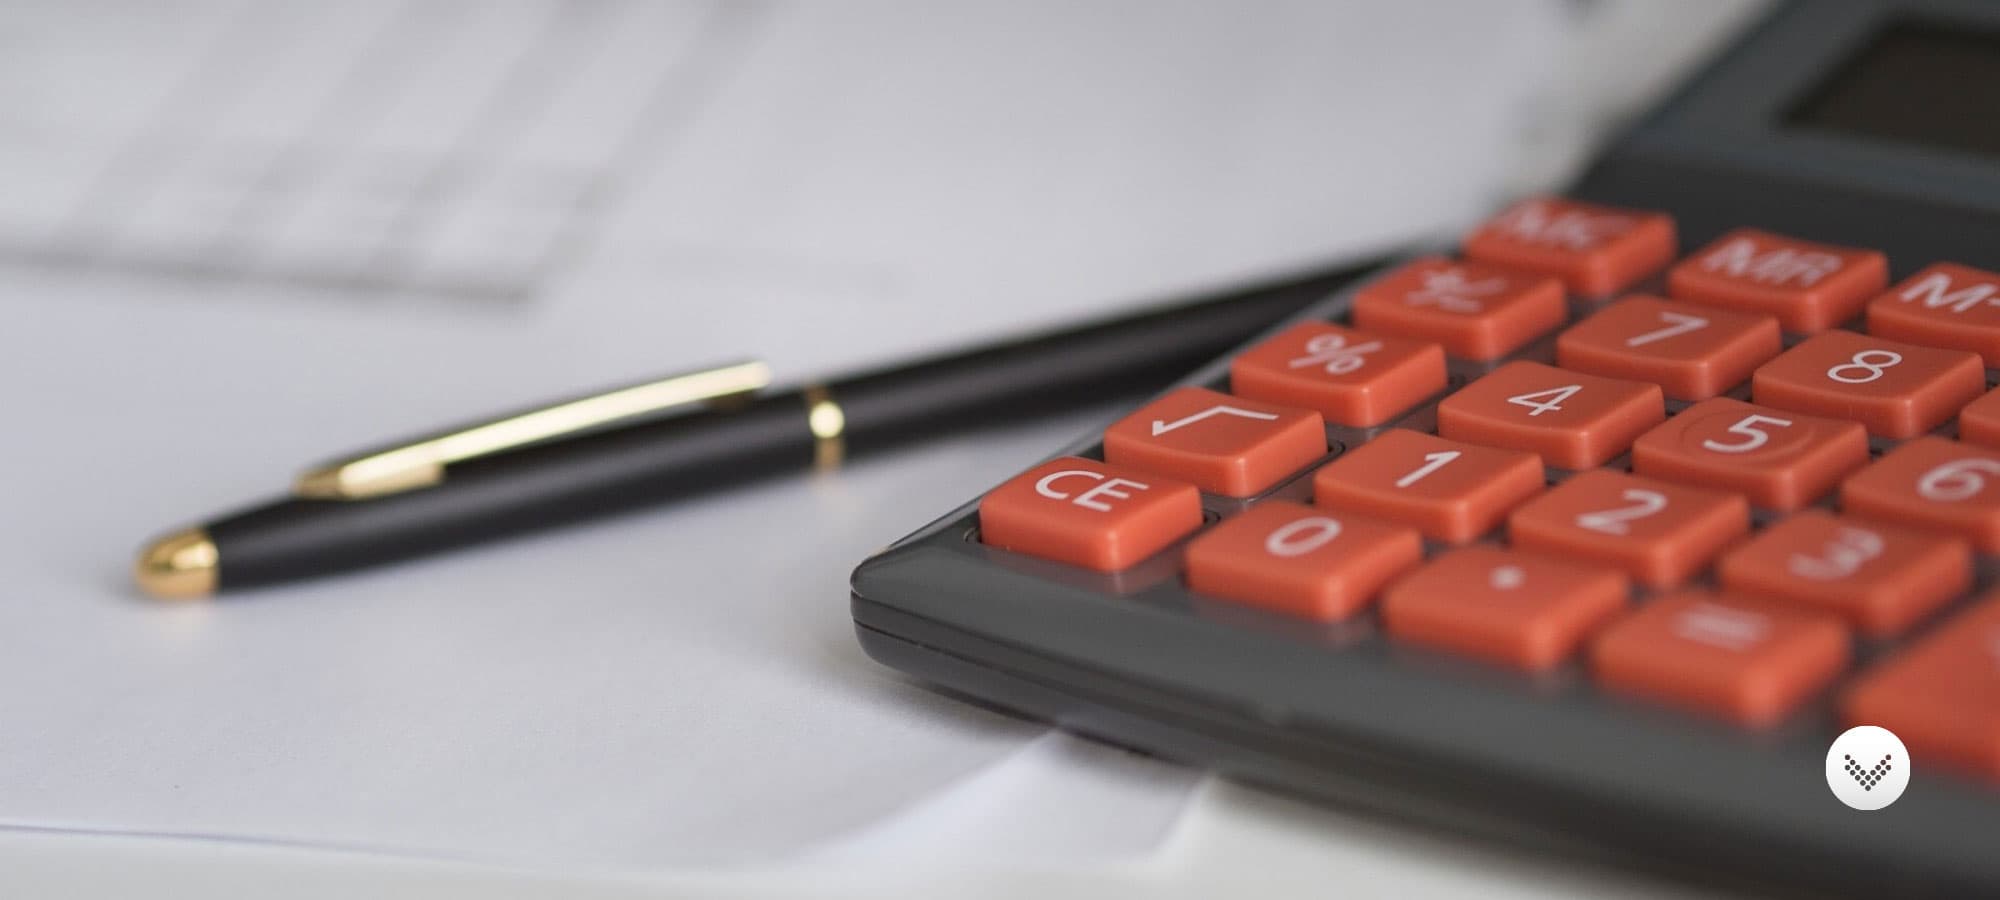 A calculator and pen situated on top of a paper form quote.